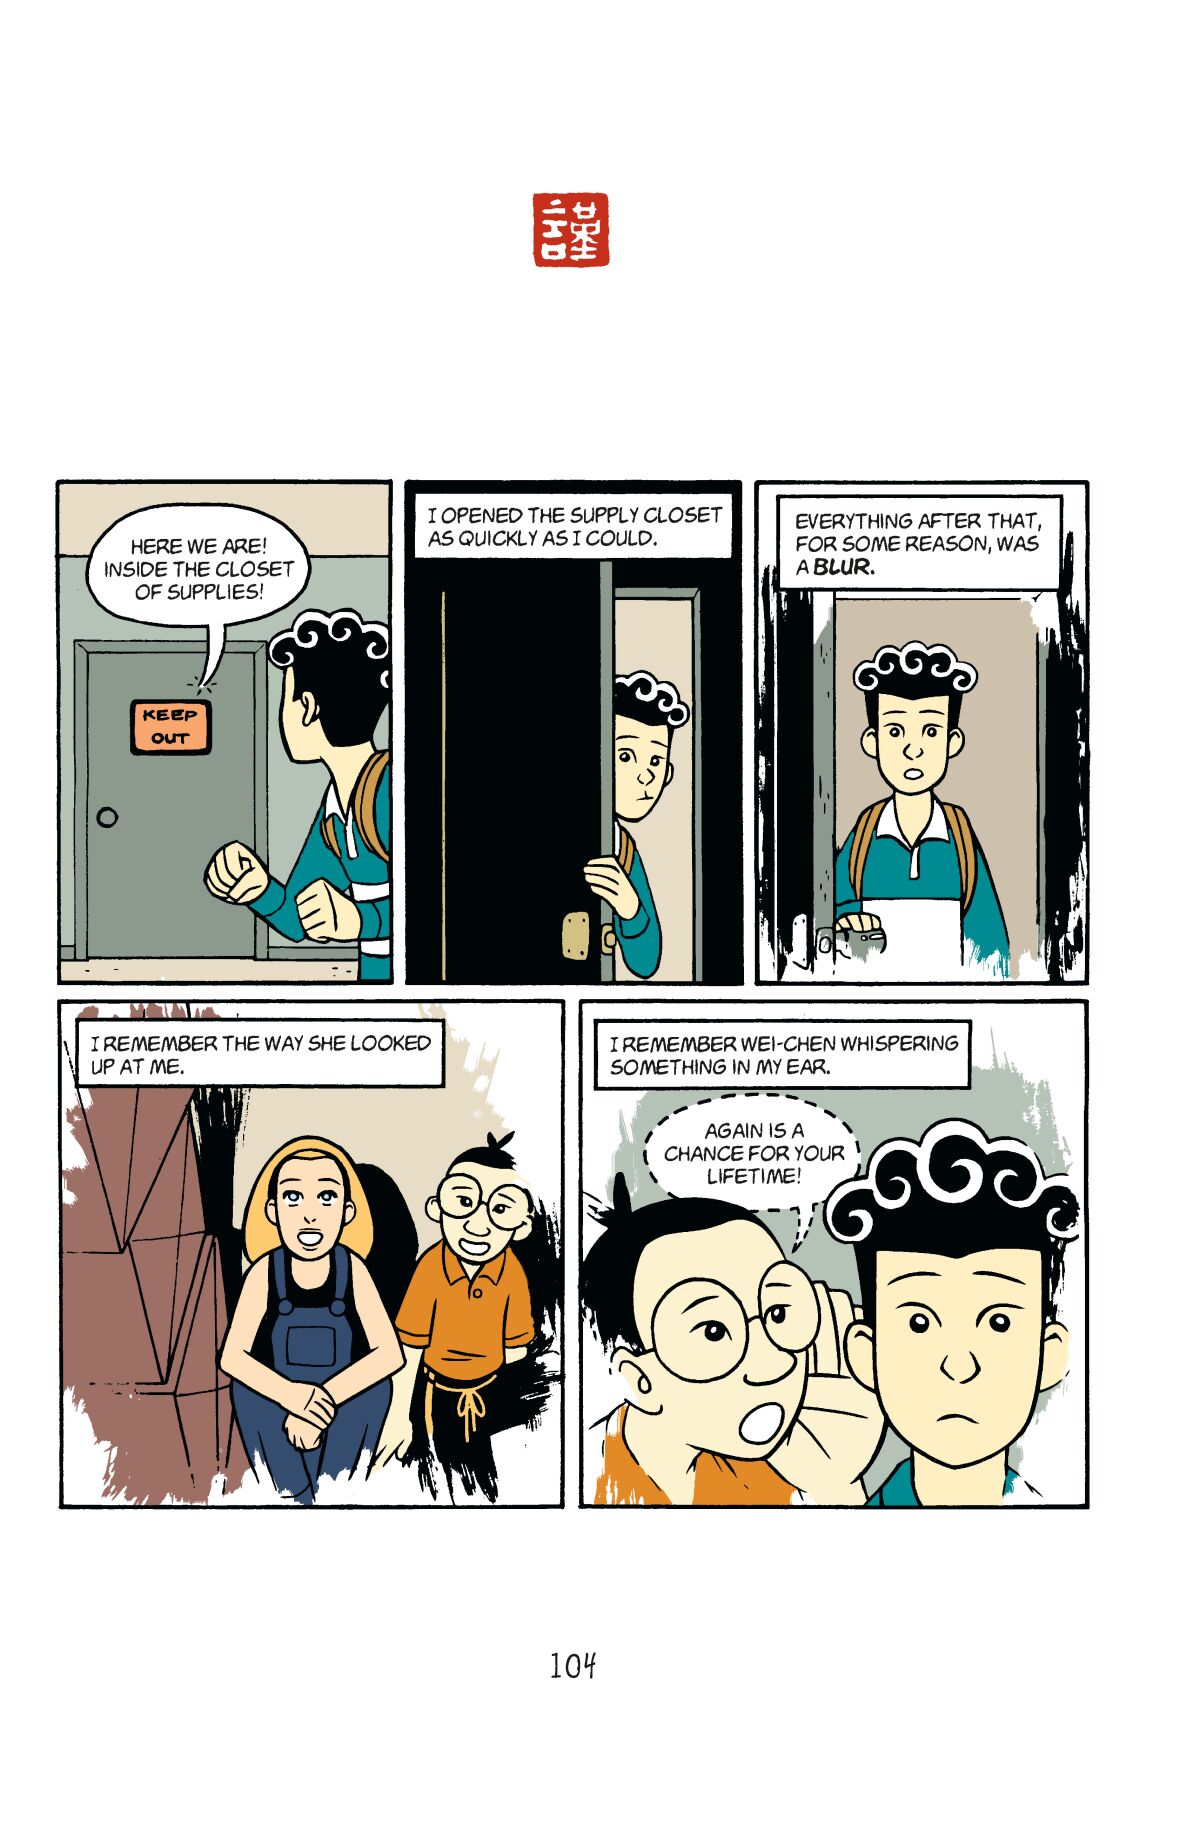 A page from "American Born Chinese" by Gene Luen Yang